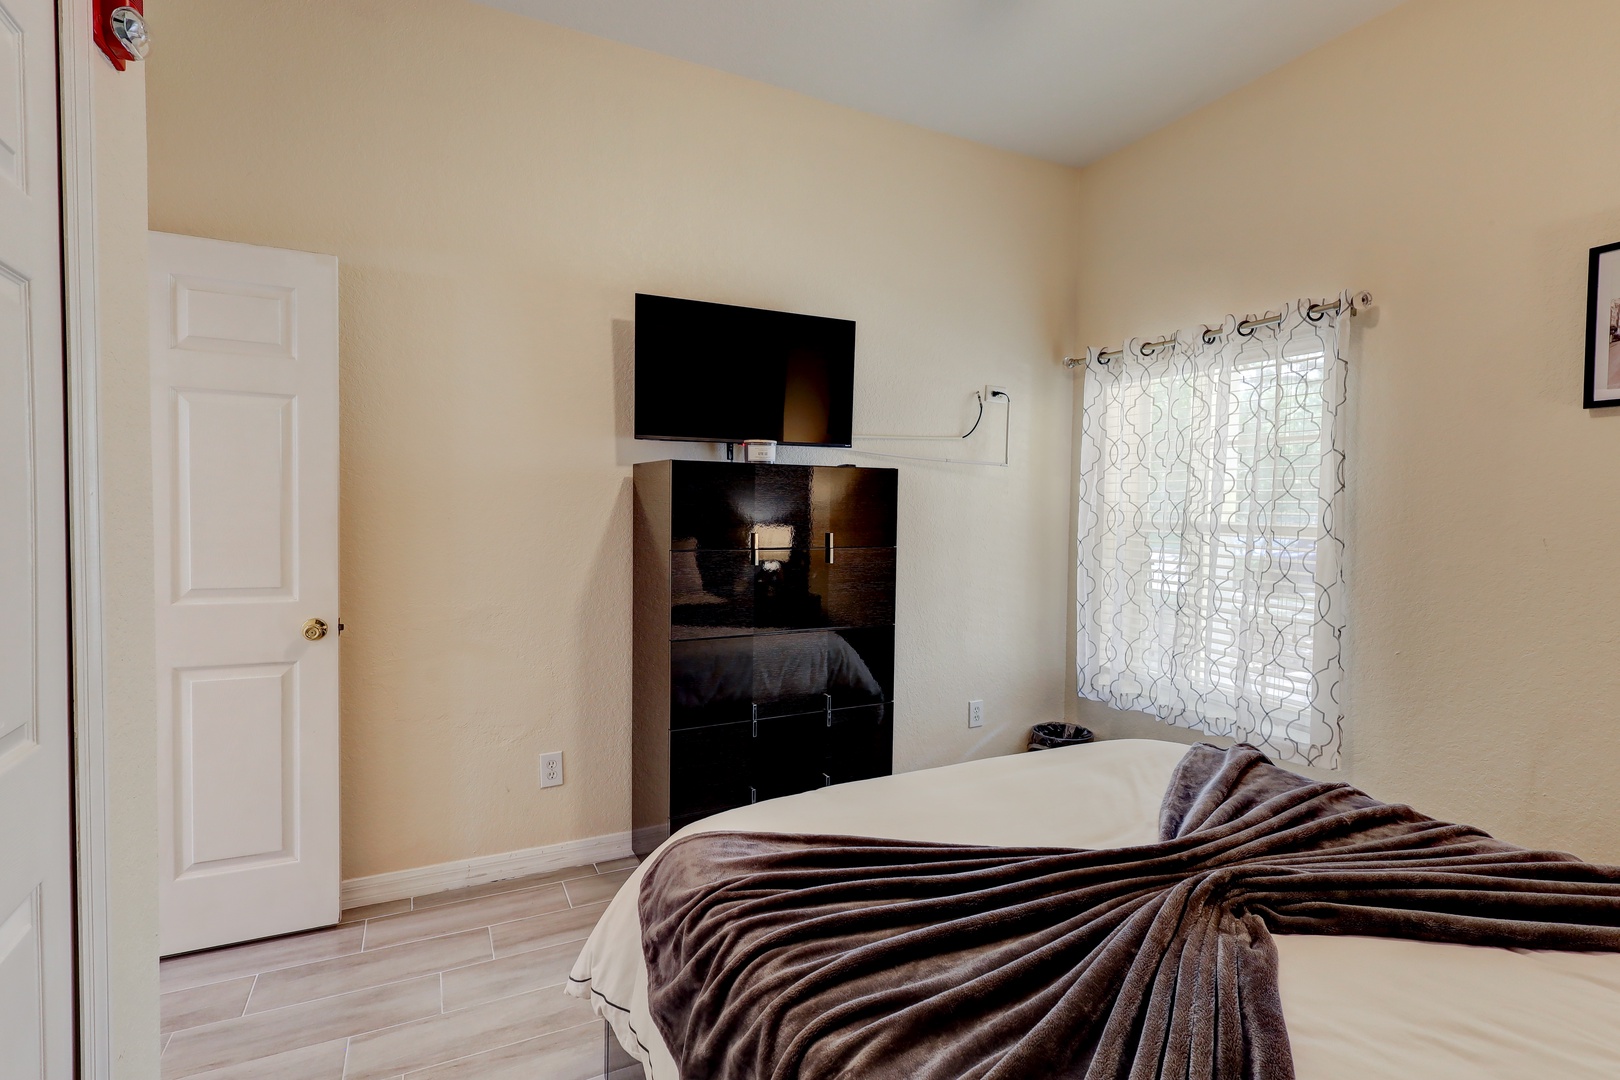 This chic queen bedroom includes a Smart TV & large dresser